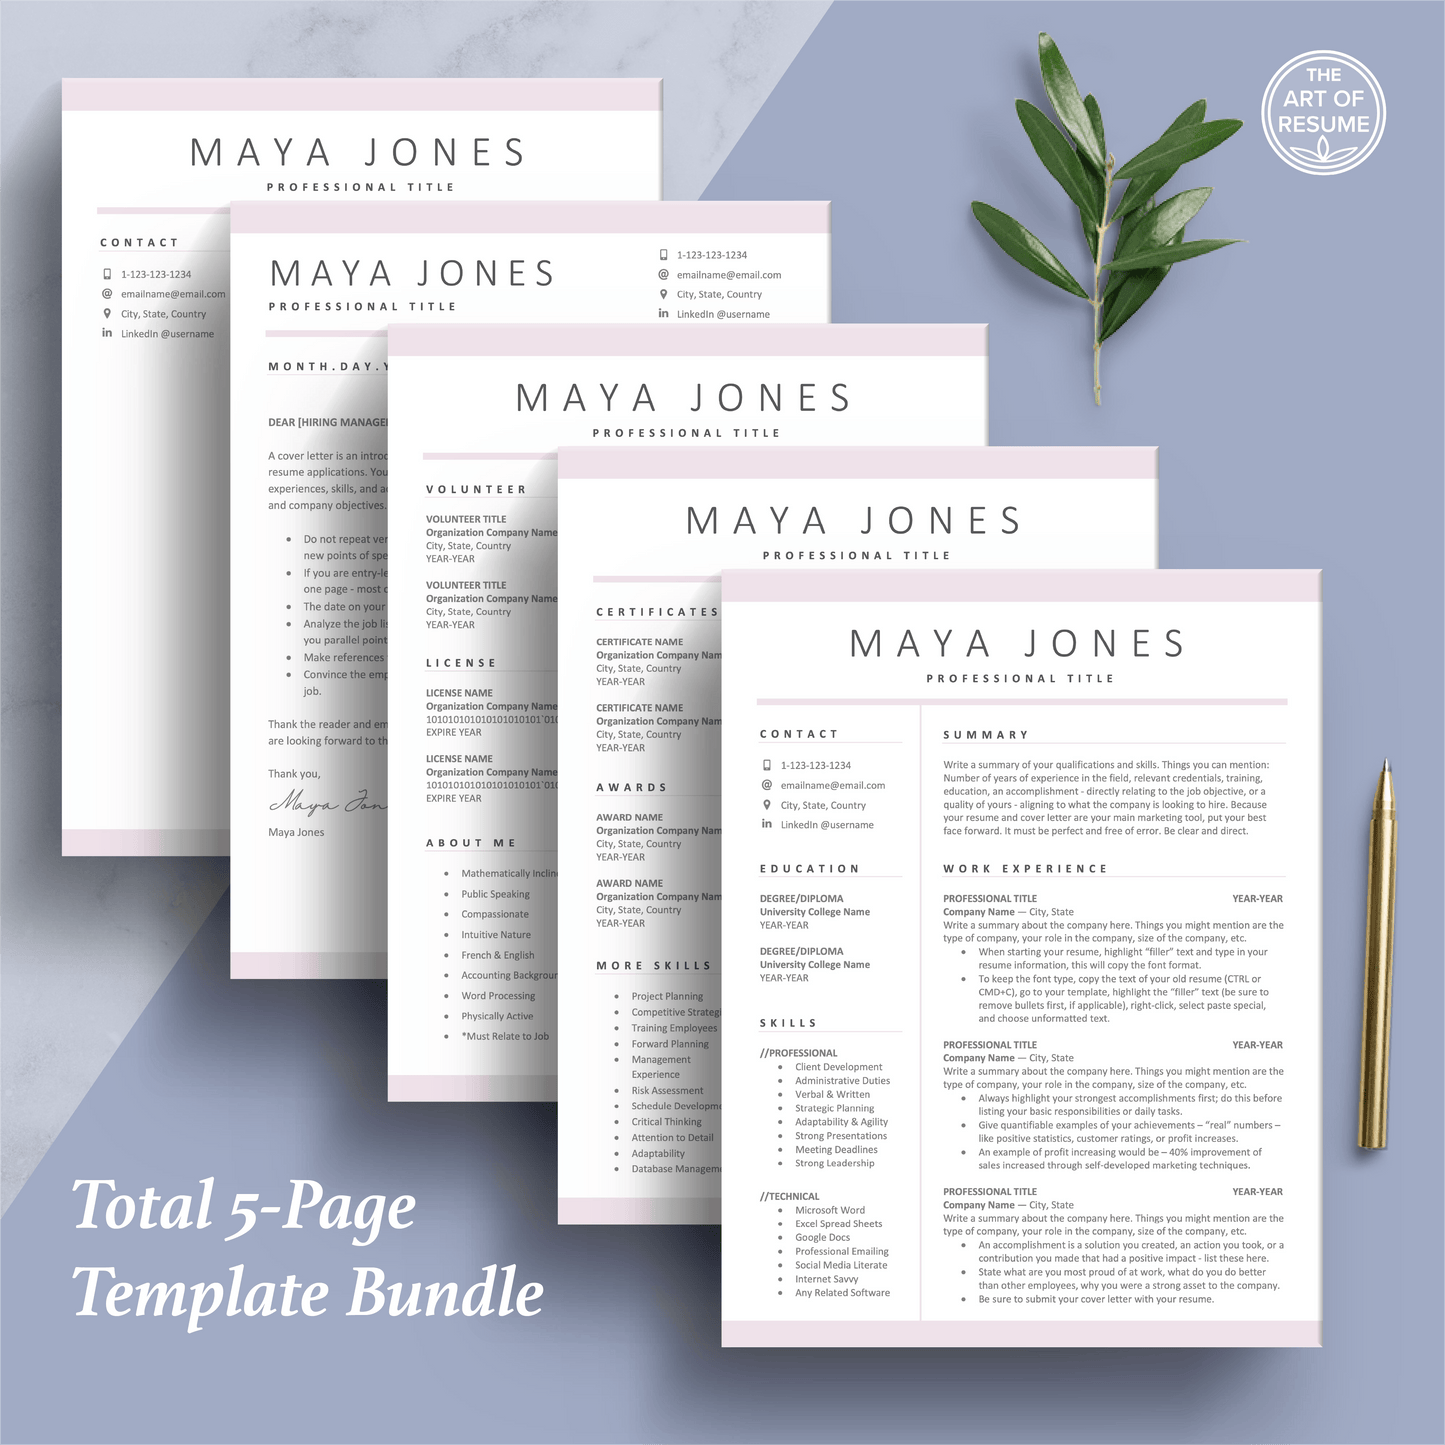 The Art of Resume Templates | Professional Simple Pink Resume CV Design Bundle including matching cover letter and reference page